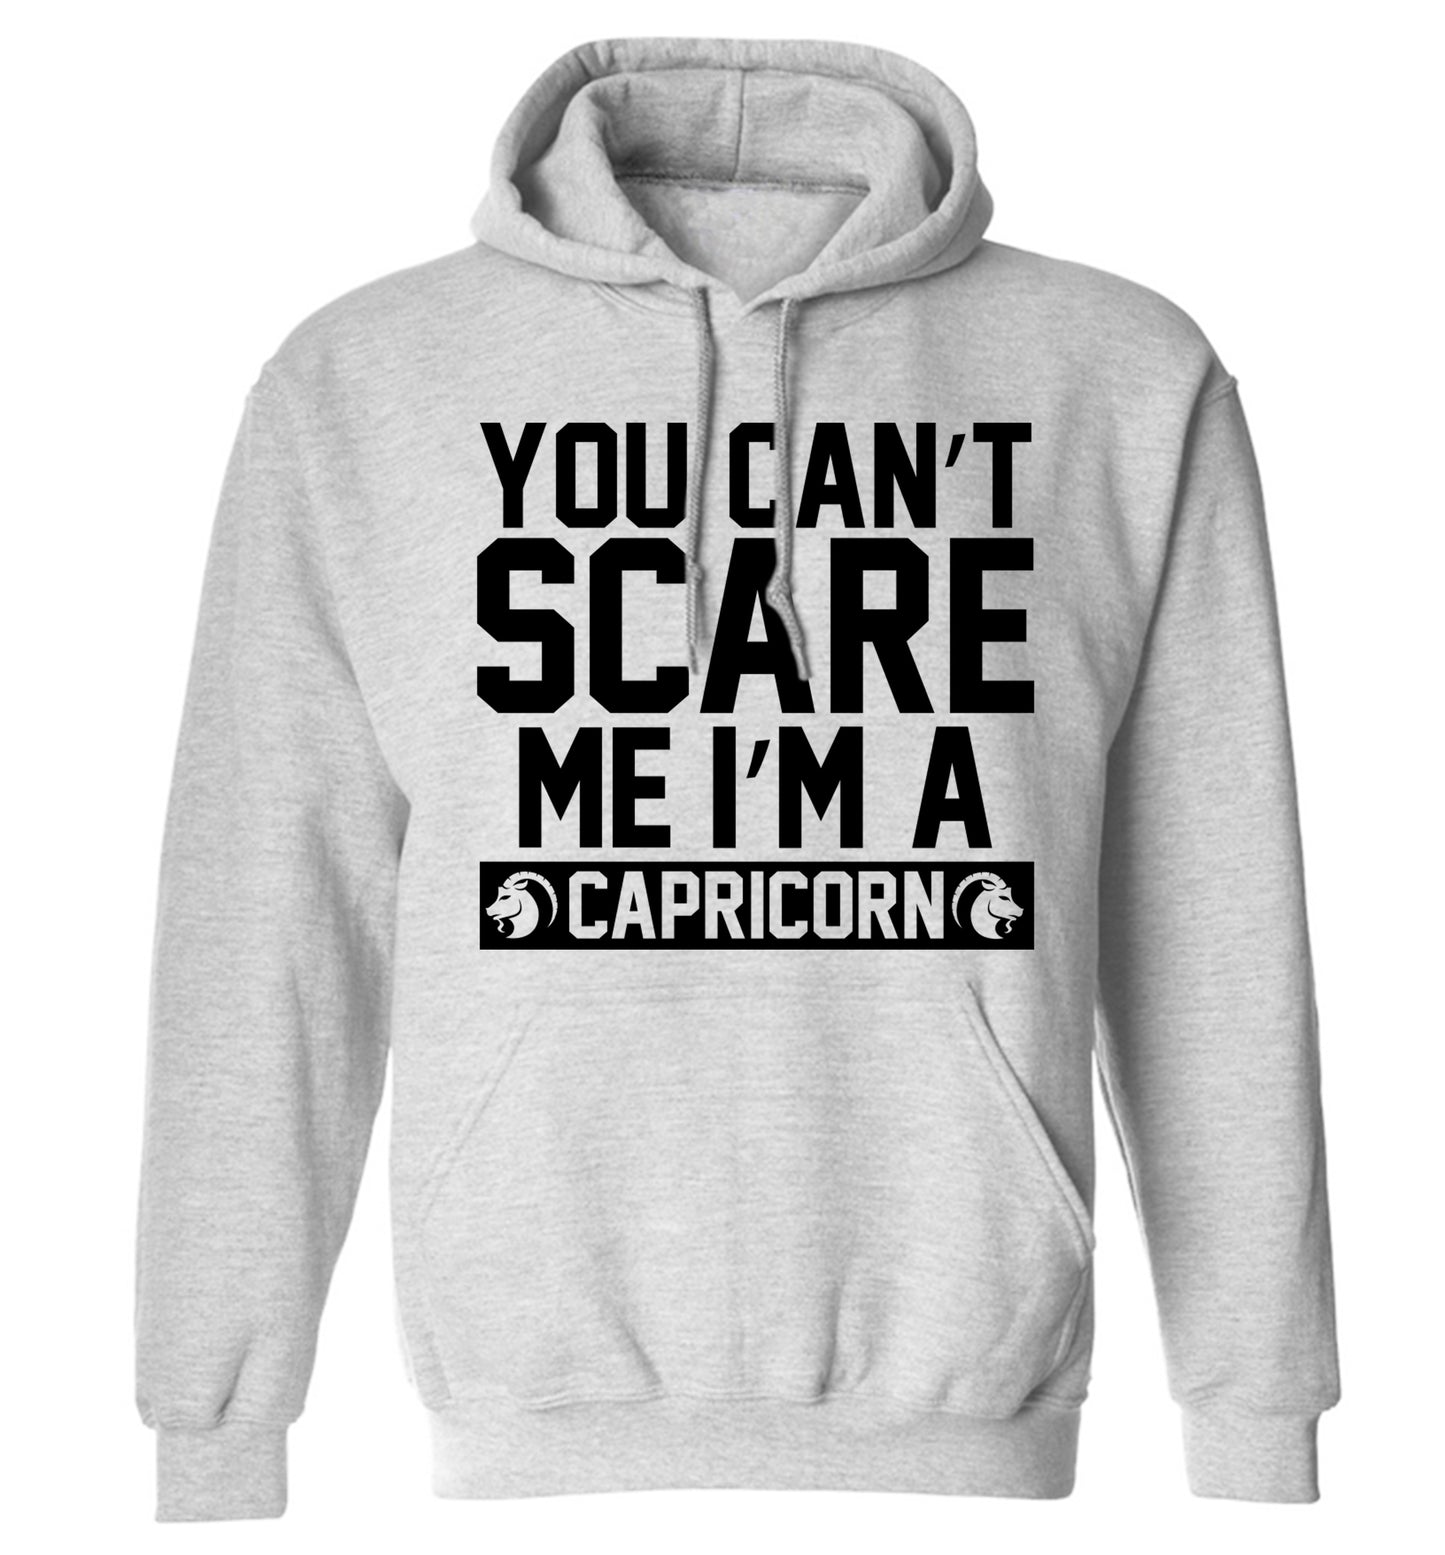 You can't scare me I'm a capricorn adults unisex grey hoodie 2XL